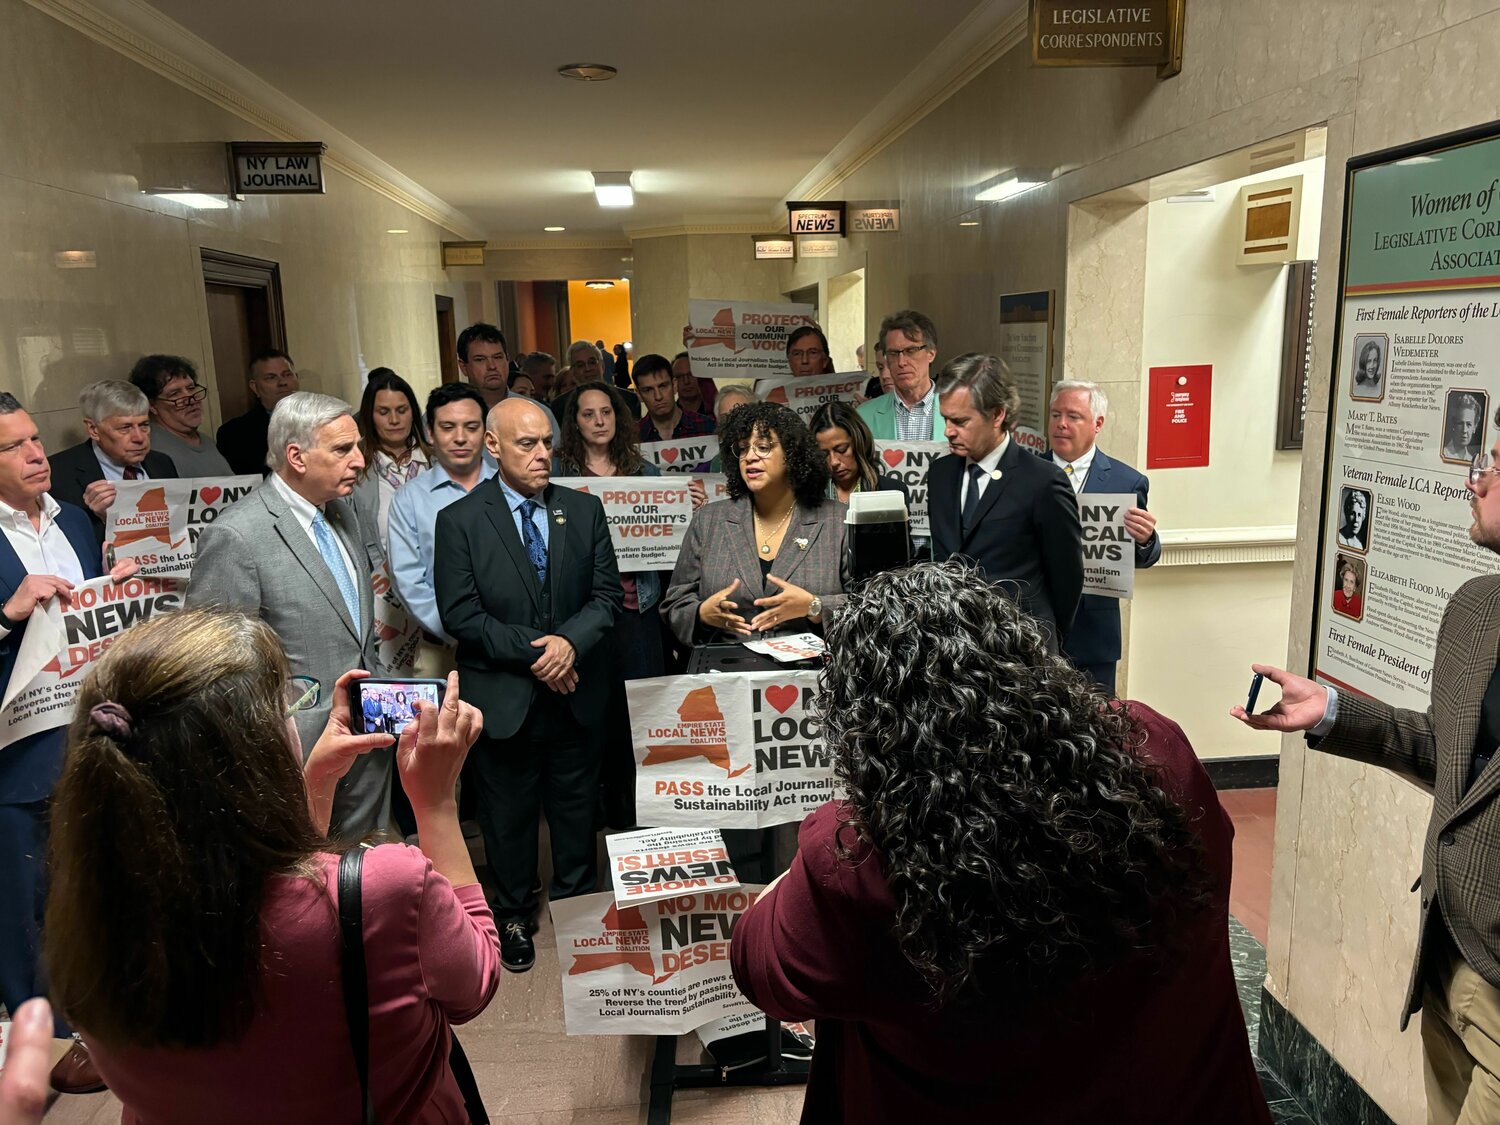 Assemblywoman Michaelle Solages joins lawmakers and supporters like Assemblyman David Weprin, at left, and state Sen. Brad Hoylman-Sigal, at right, to call on her colleagues to support the Local Journalism Sustainability Act. The measure — currently included in the senate’s One House budget — would provide tax credits to local news outlets, so they can keep local reporters on the ground and covering communities.